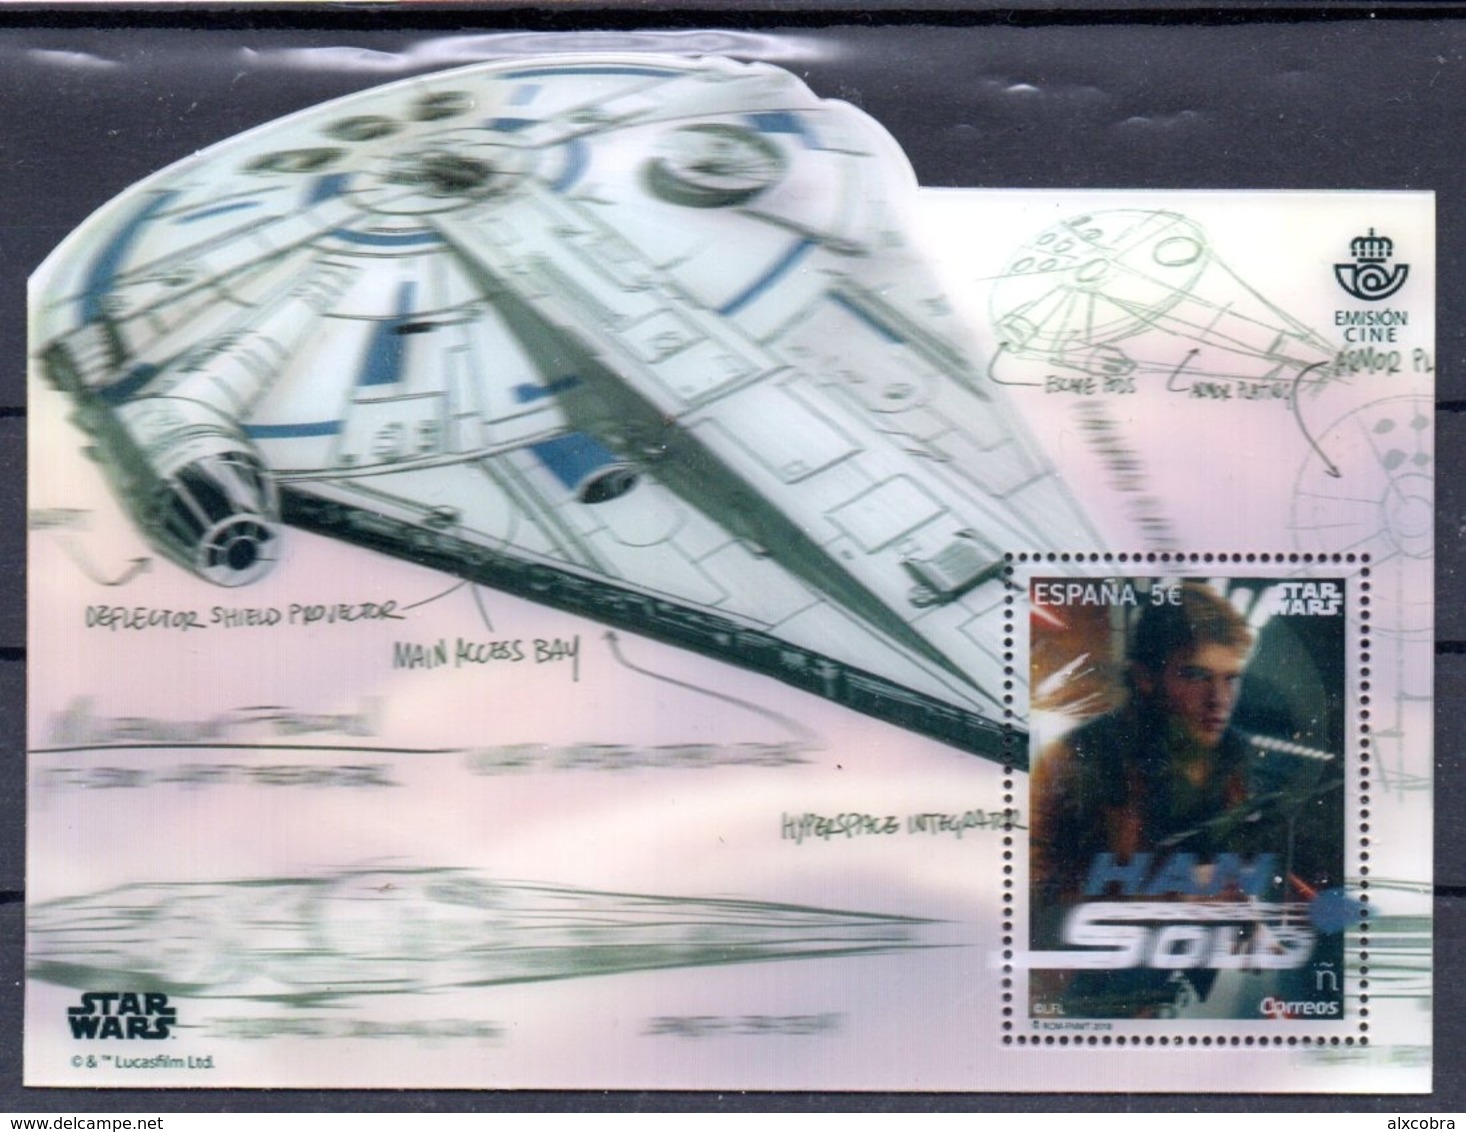 Spain Han Solo Star Wars 2018 M/S Holographic MNH - Holograms